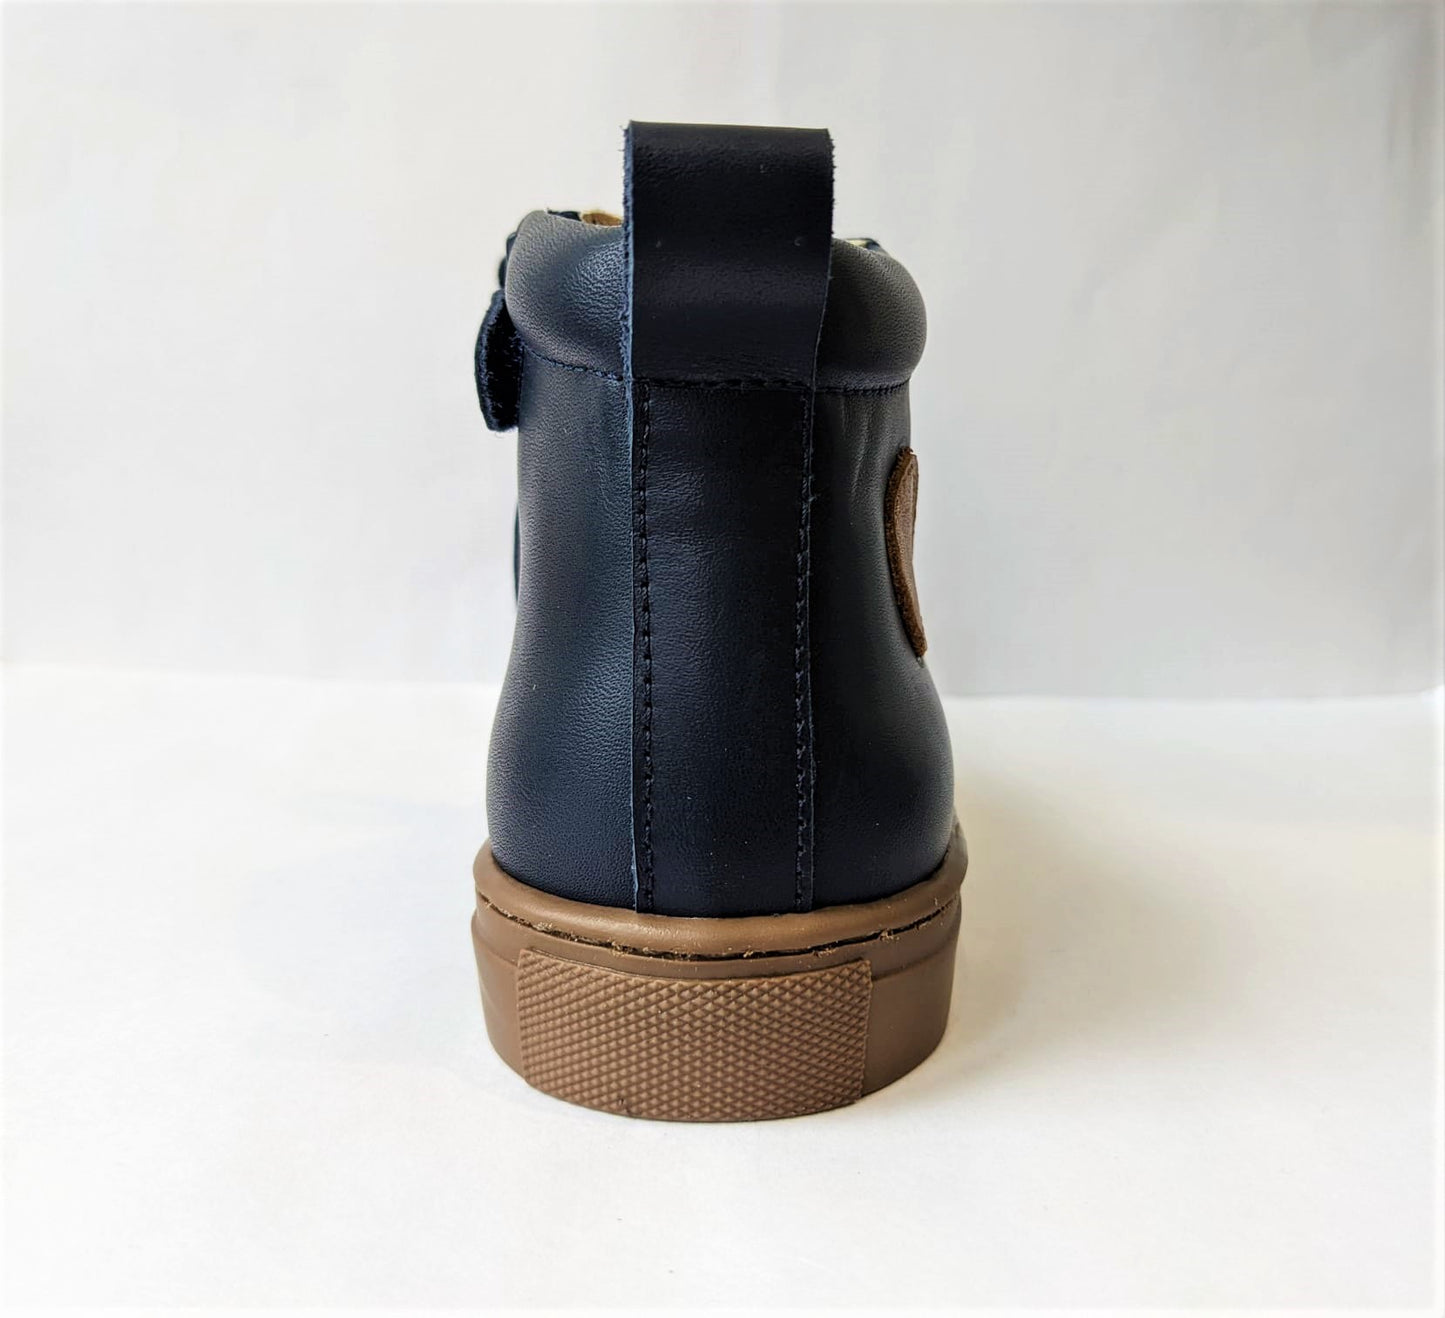 A boys boot by Petasil, style Esme, in navy with lace and side zip fastening. Back view.